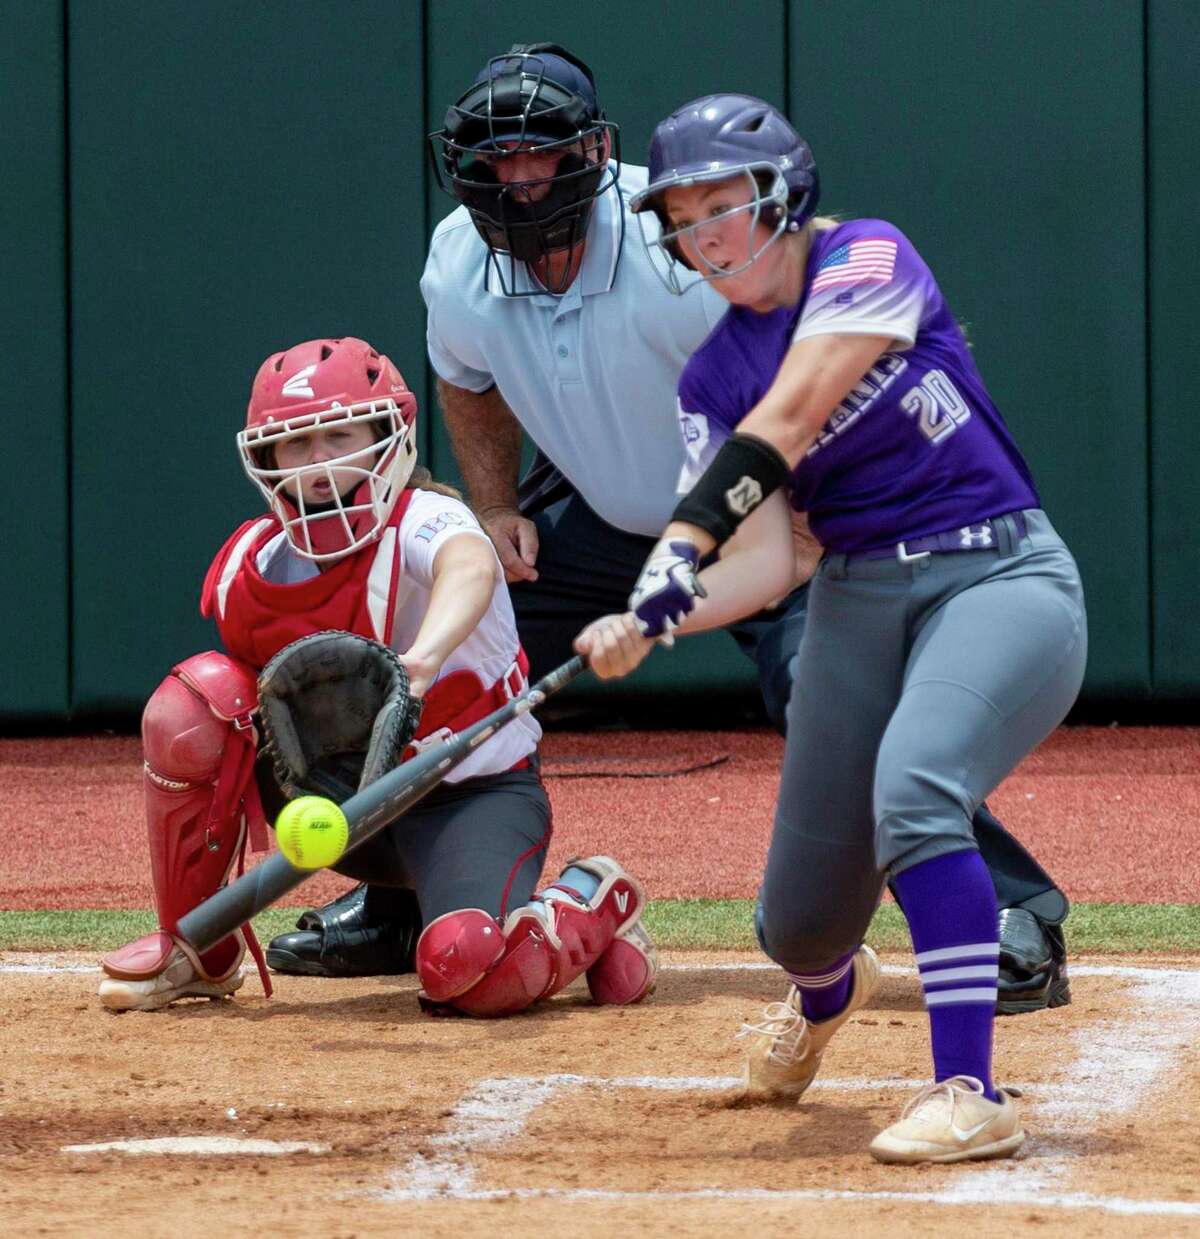 Senior first baseman Reece Redden hopes to bookend her career with another state championship. Redden was a member of the team that won in 2019.